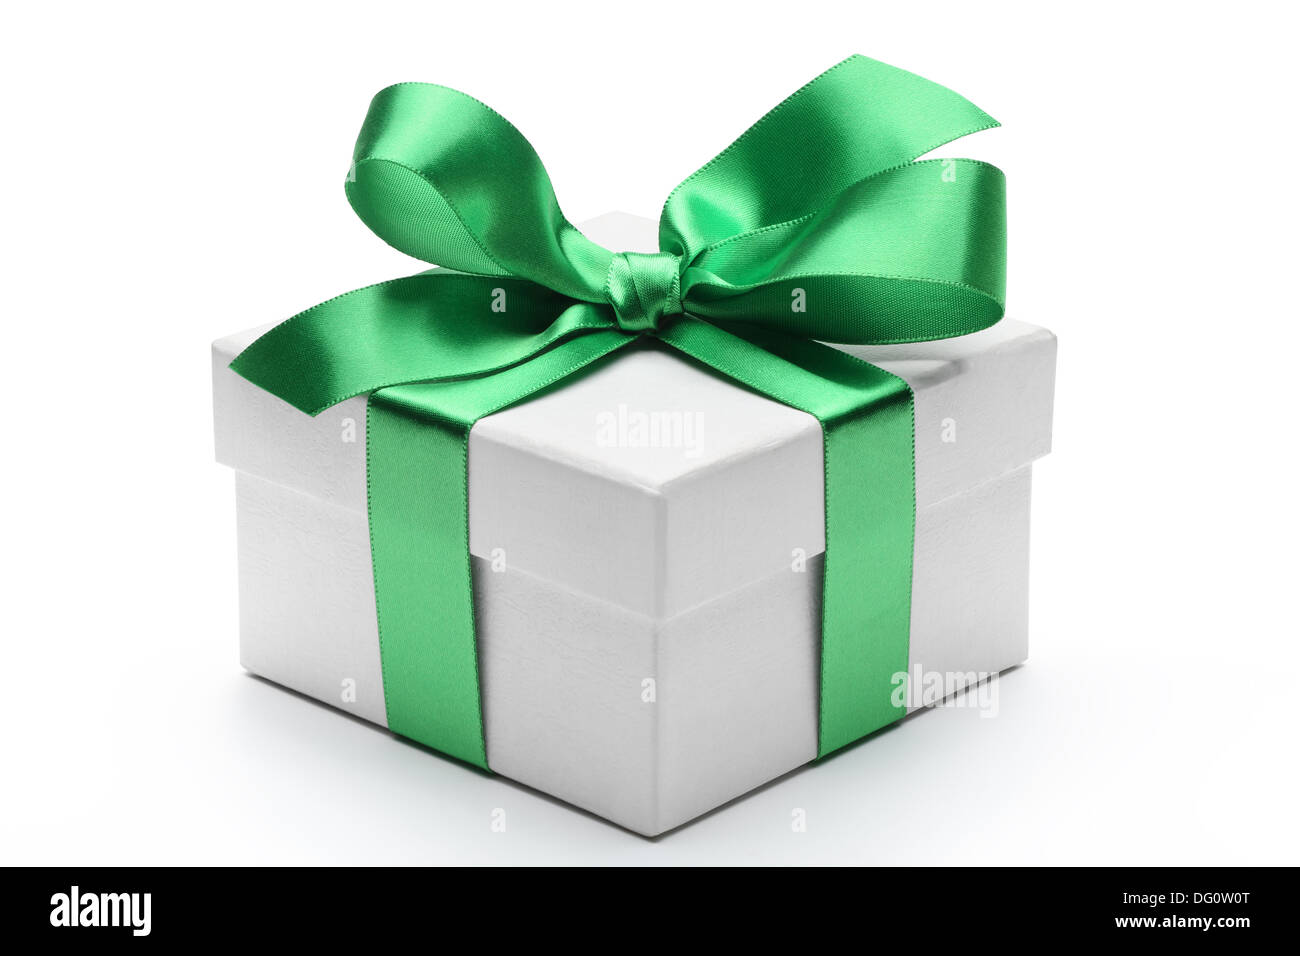 https://c8.alamy.com/comp/DG0W0T/gift-box-with-green-ribbon-bow-isolated-on-white-background-DG0W0T.jpg